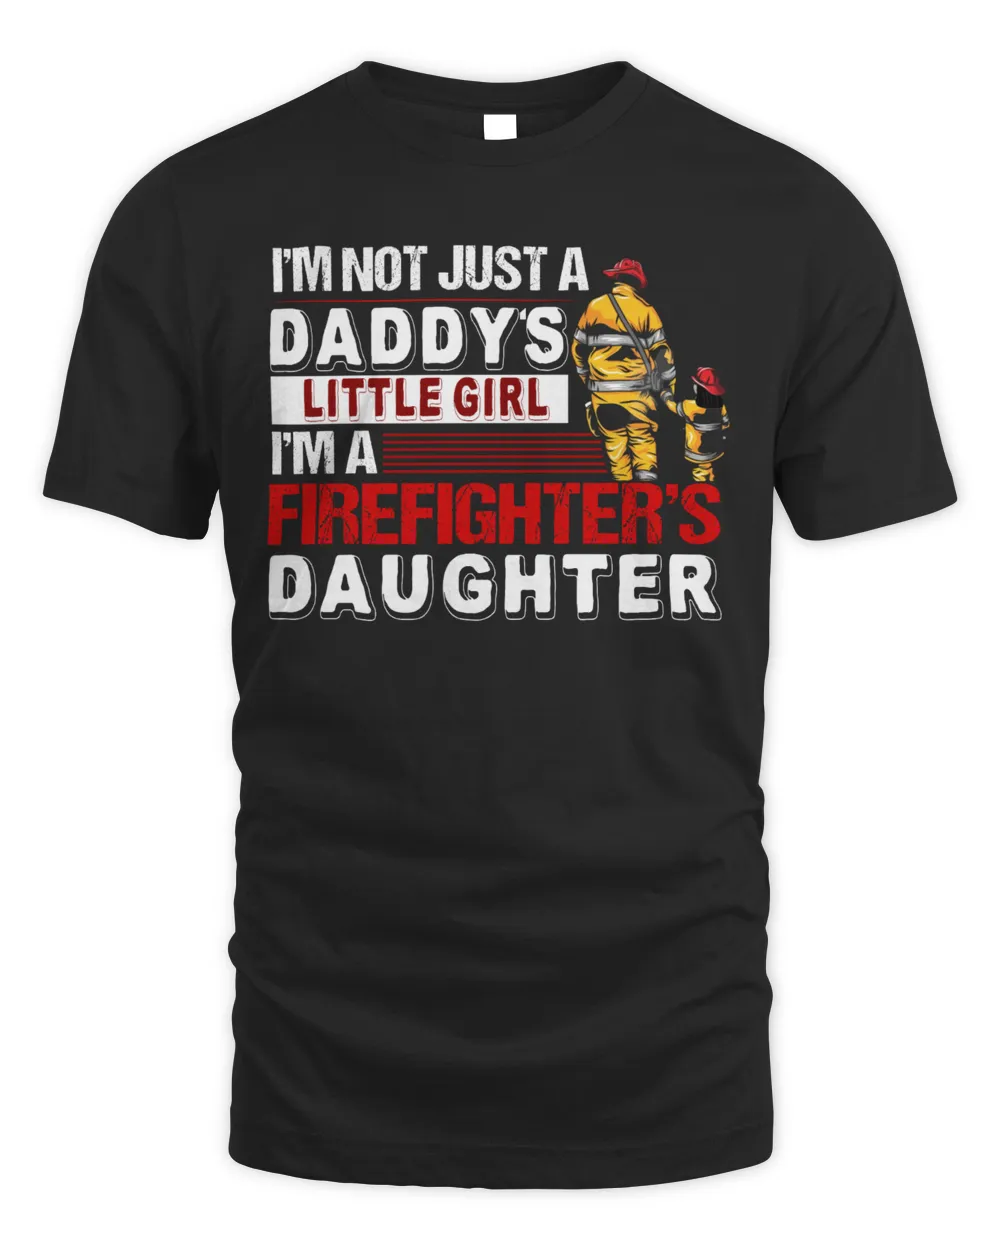 I'm Not Just A Daddy's Little Girl, Firefighter Daughter